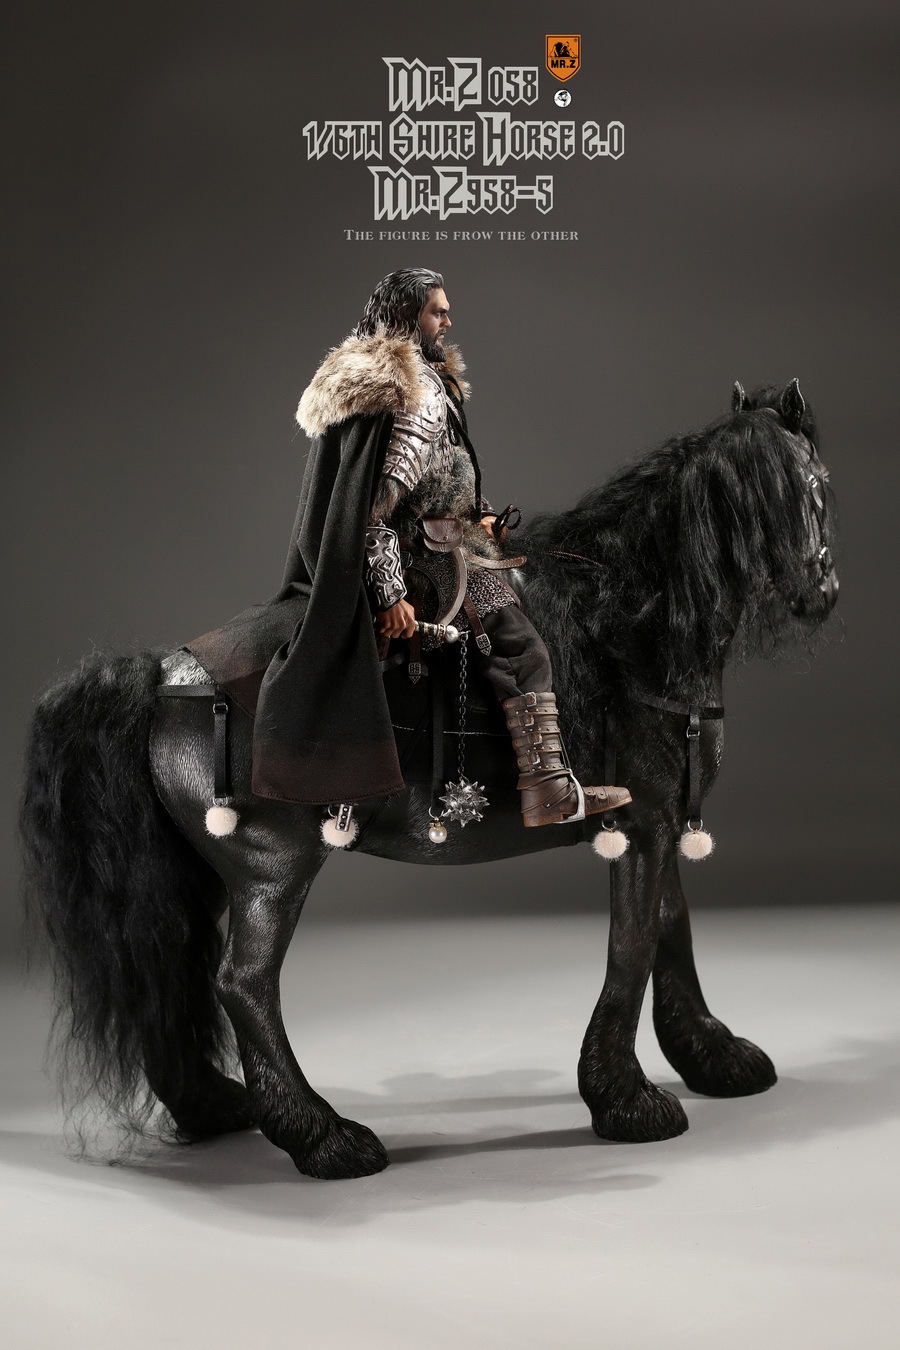 NEW PRODUCT: MR. Z: 58th round-Shire Horse 2.0 version full set of 5 colors  08575910